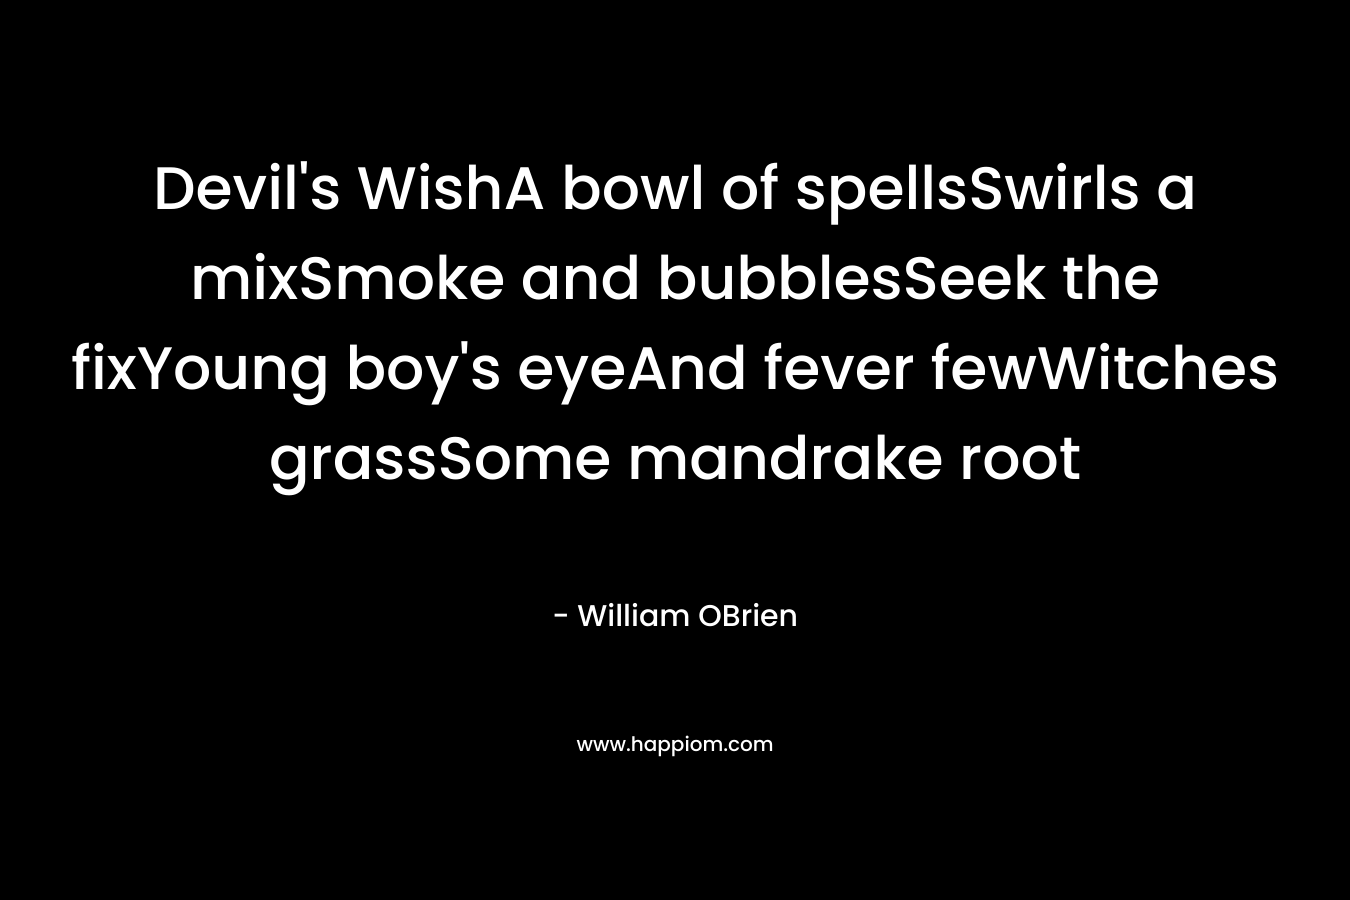 Devil's WishA bowl of spellsSwirls a mixSmoke and bubblesSeek the fixYoung boy's eyeAnd fever fewWitches grassSome mandrake root